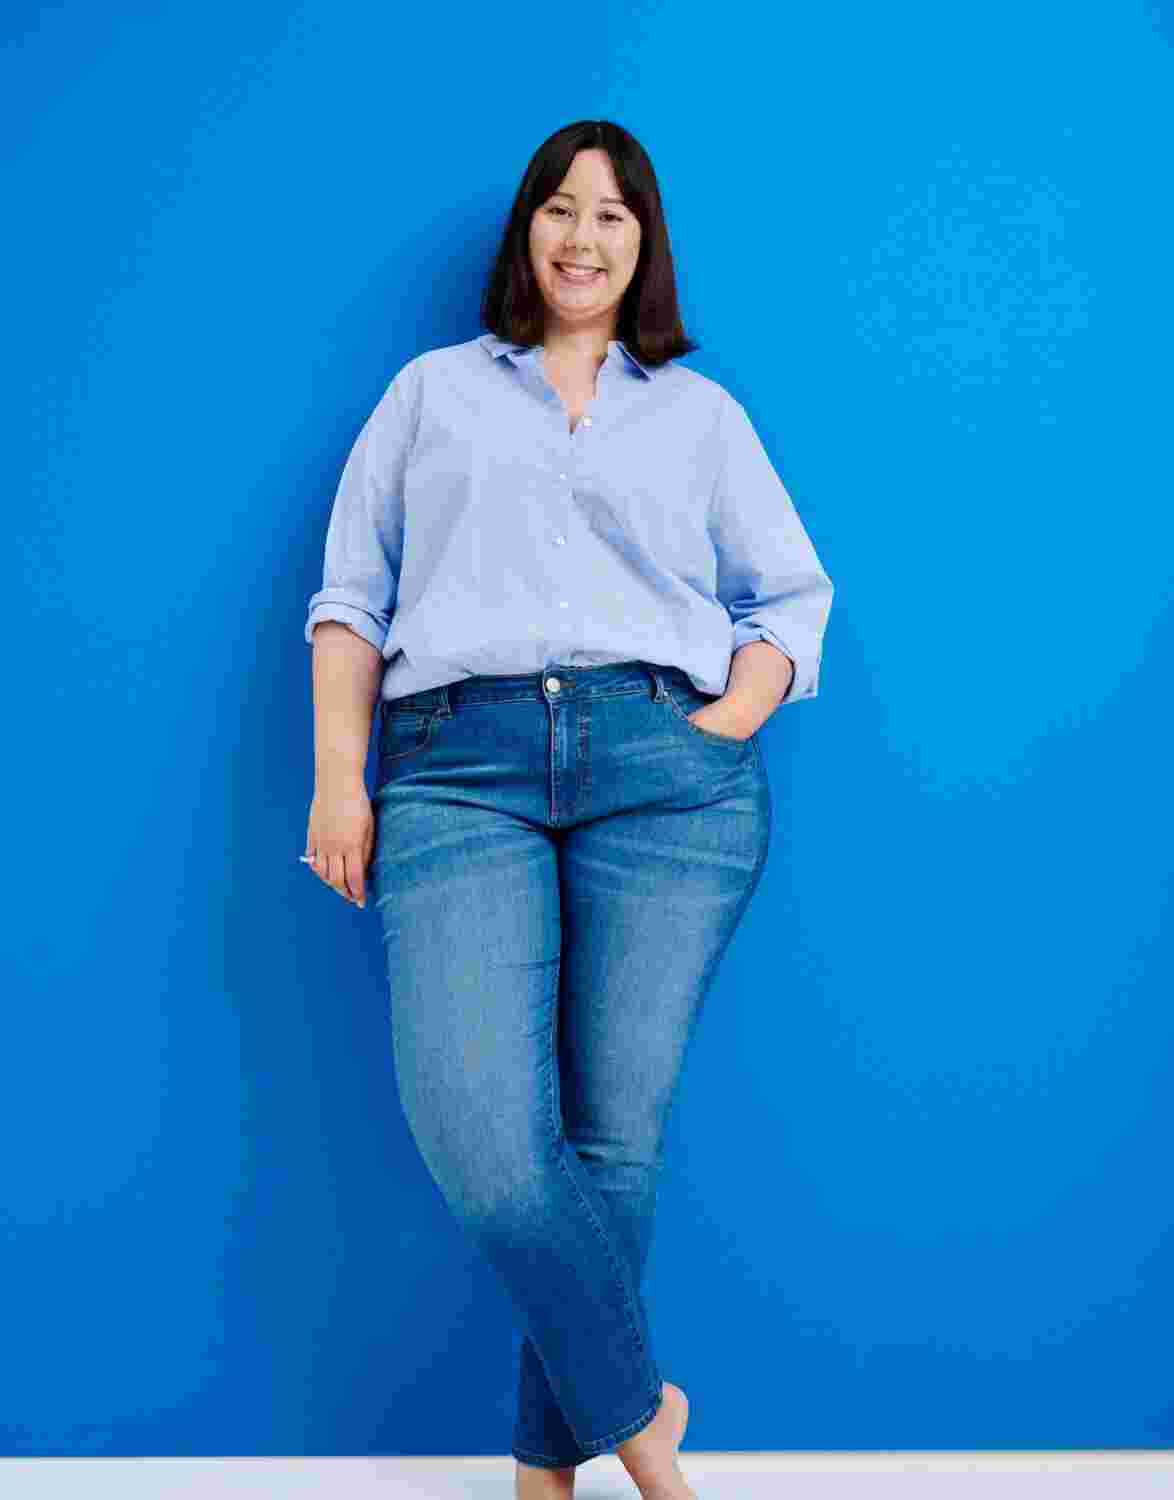 Normal waist-fit jeans